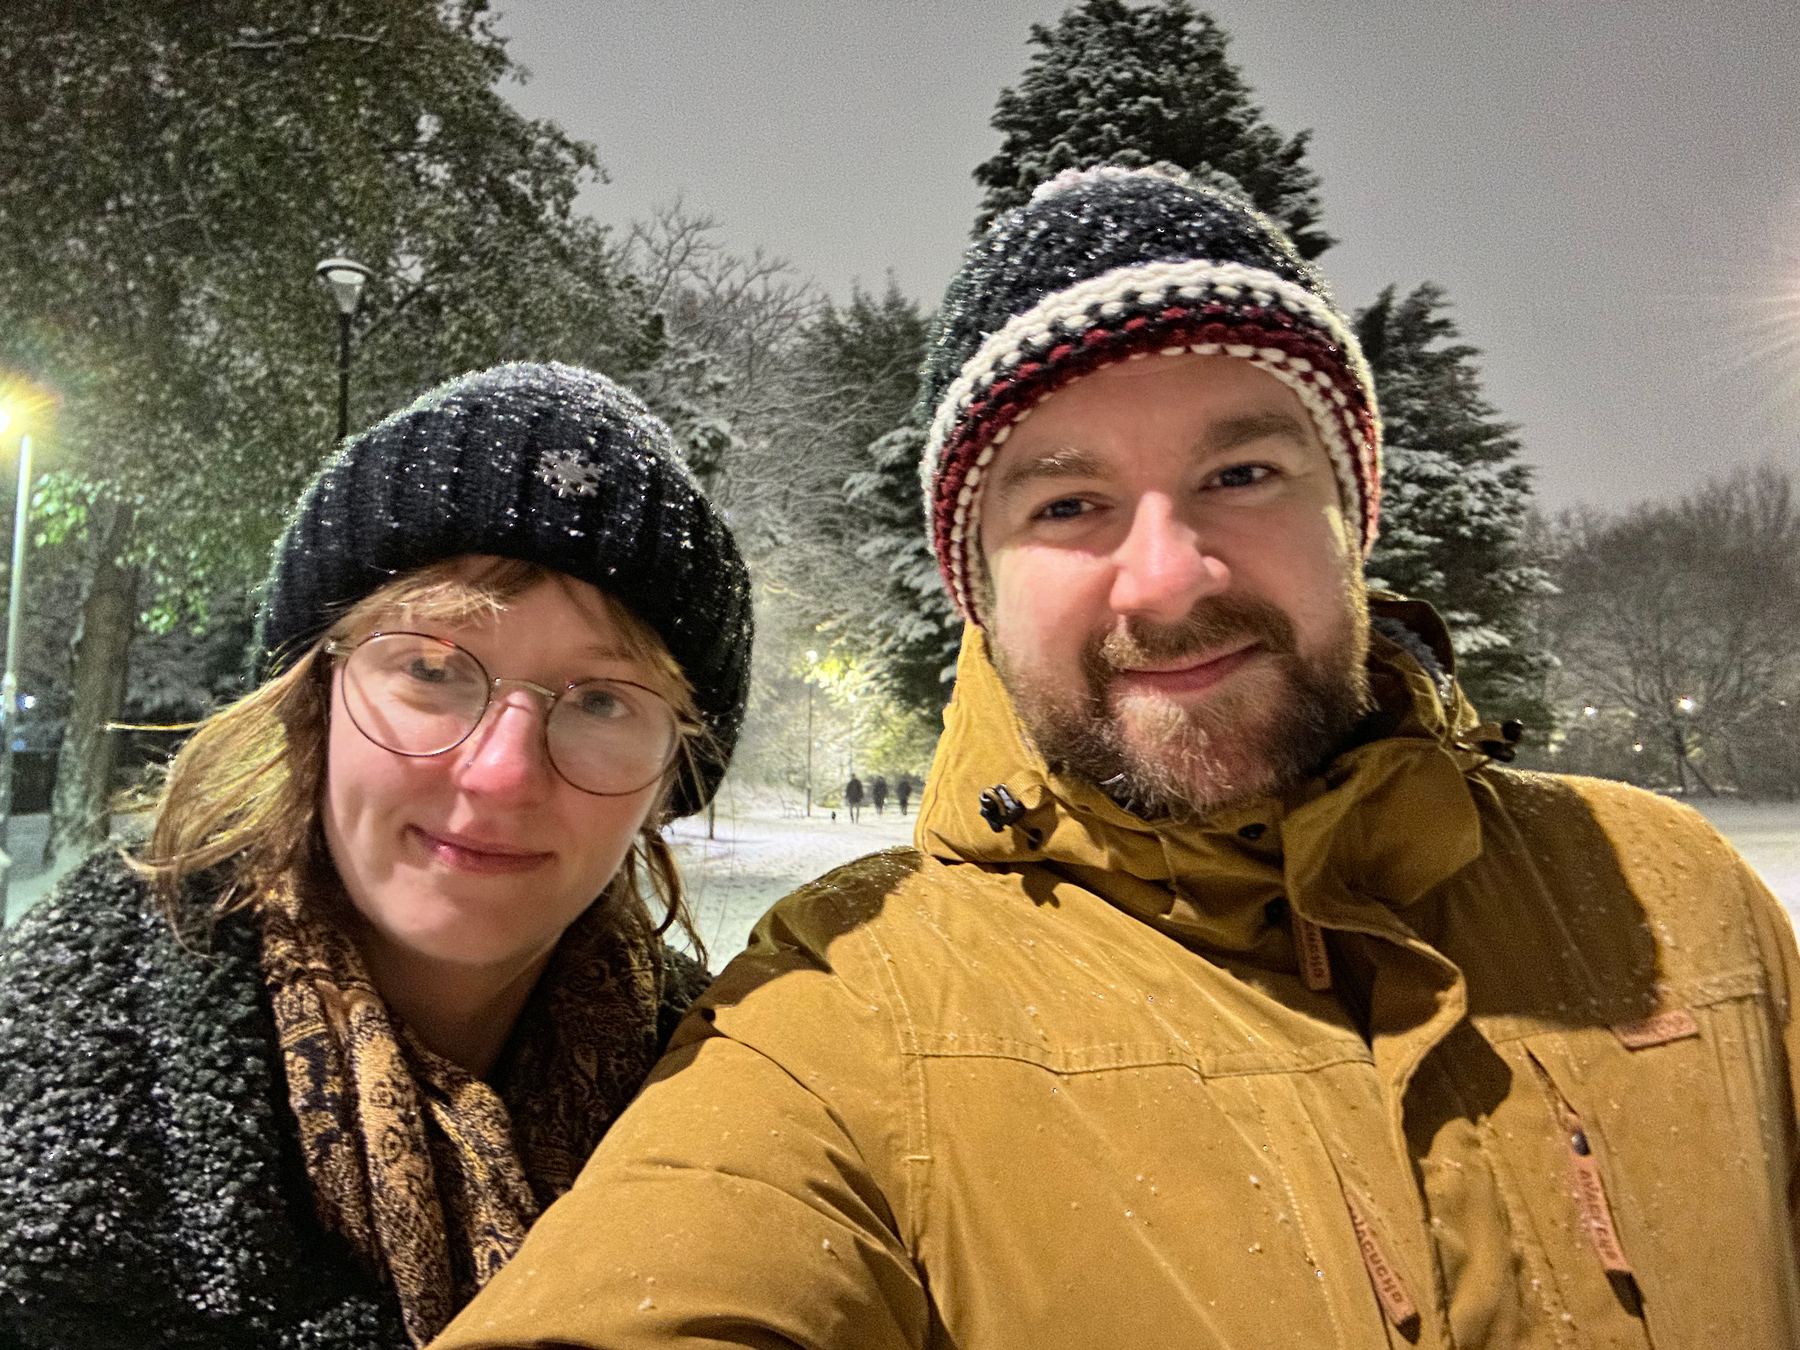 Me and Charlotte stood in the snow with a light woodland backdrop